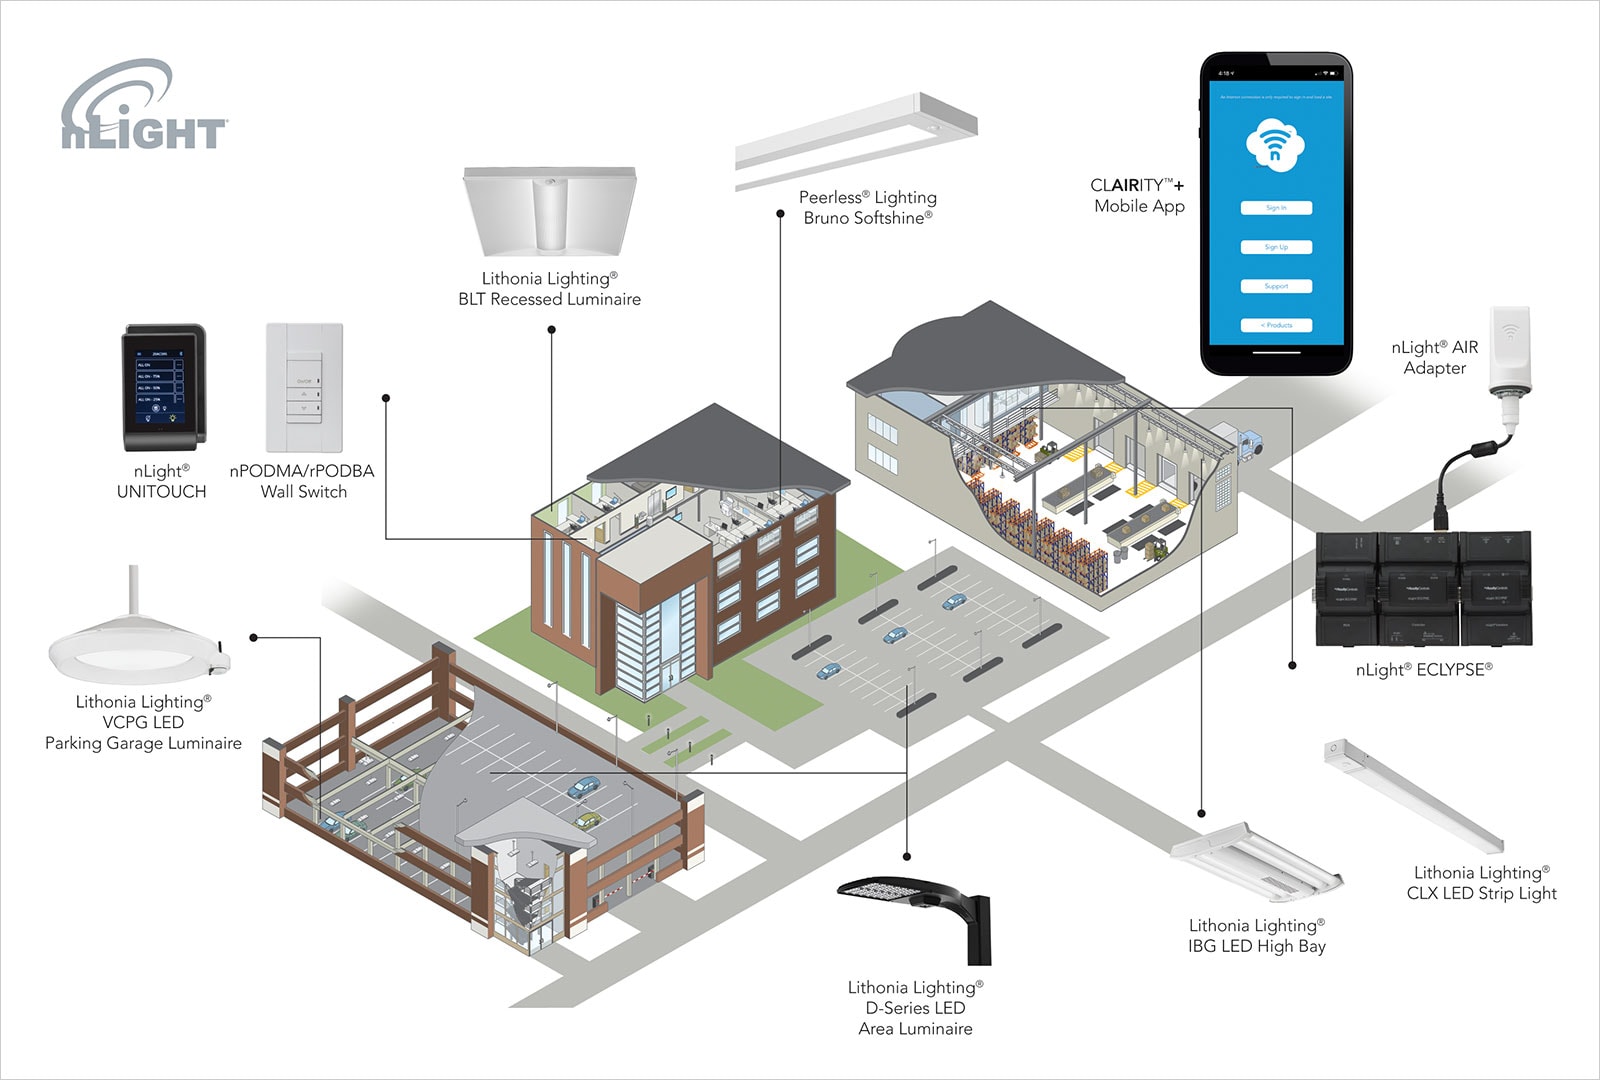 An illustration shows how nLight's wireless lighting controls can be utilized in just one room or an entire campus - including parking decks, residential halls, and academic buildings.